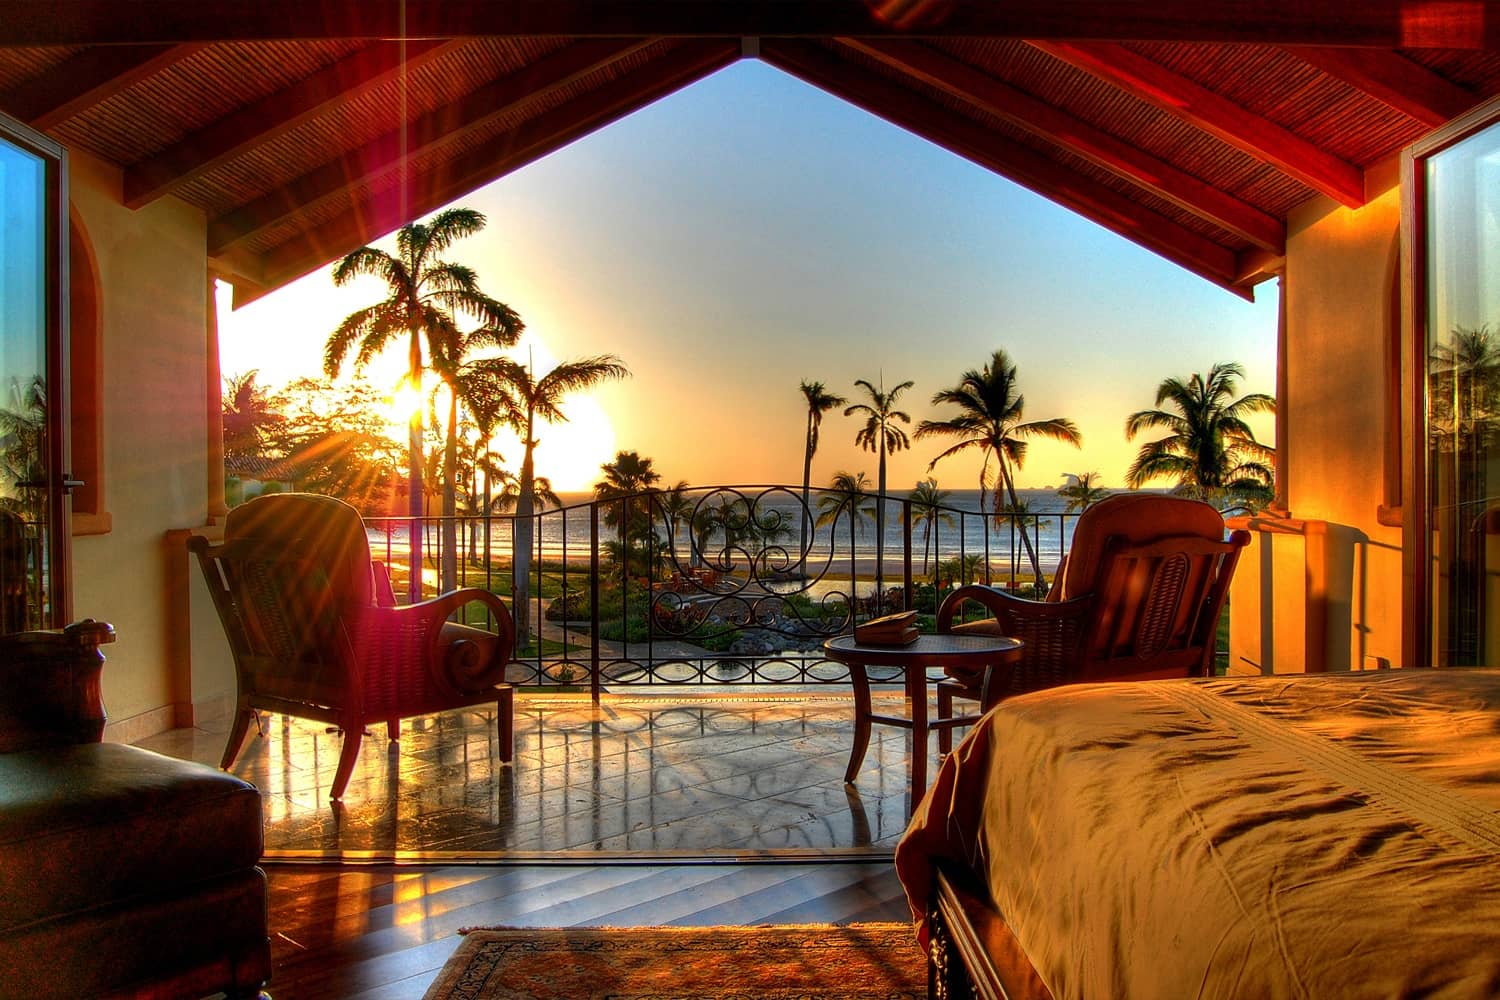 Now you can enjoy a piece of this paradise. Ideally located steps from the ocean on Playa Flamingo.